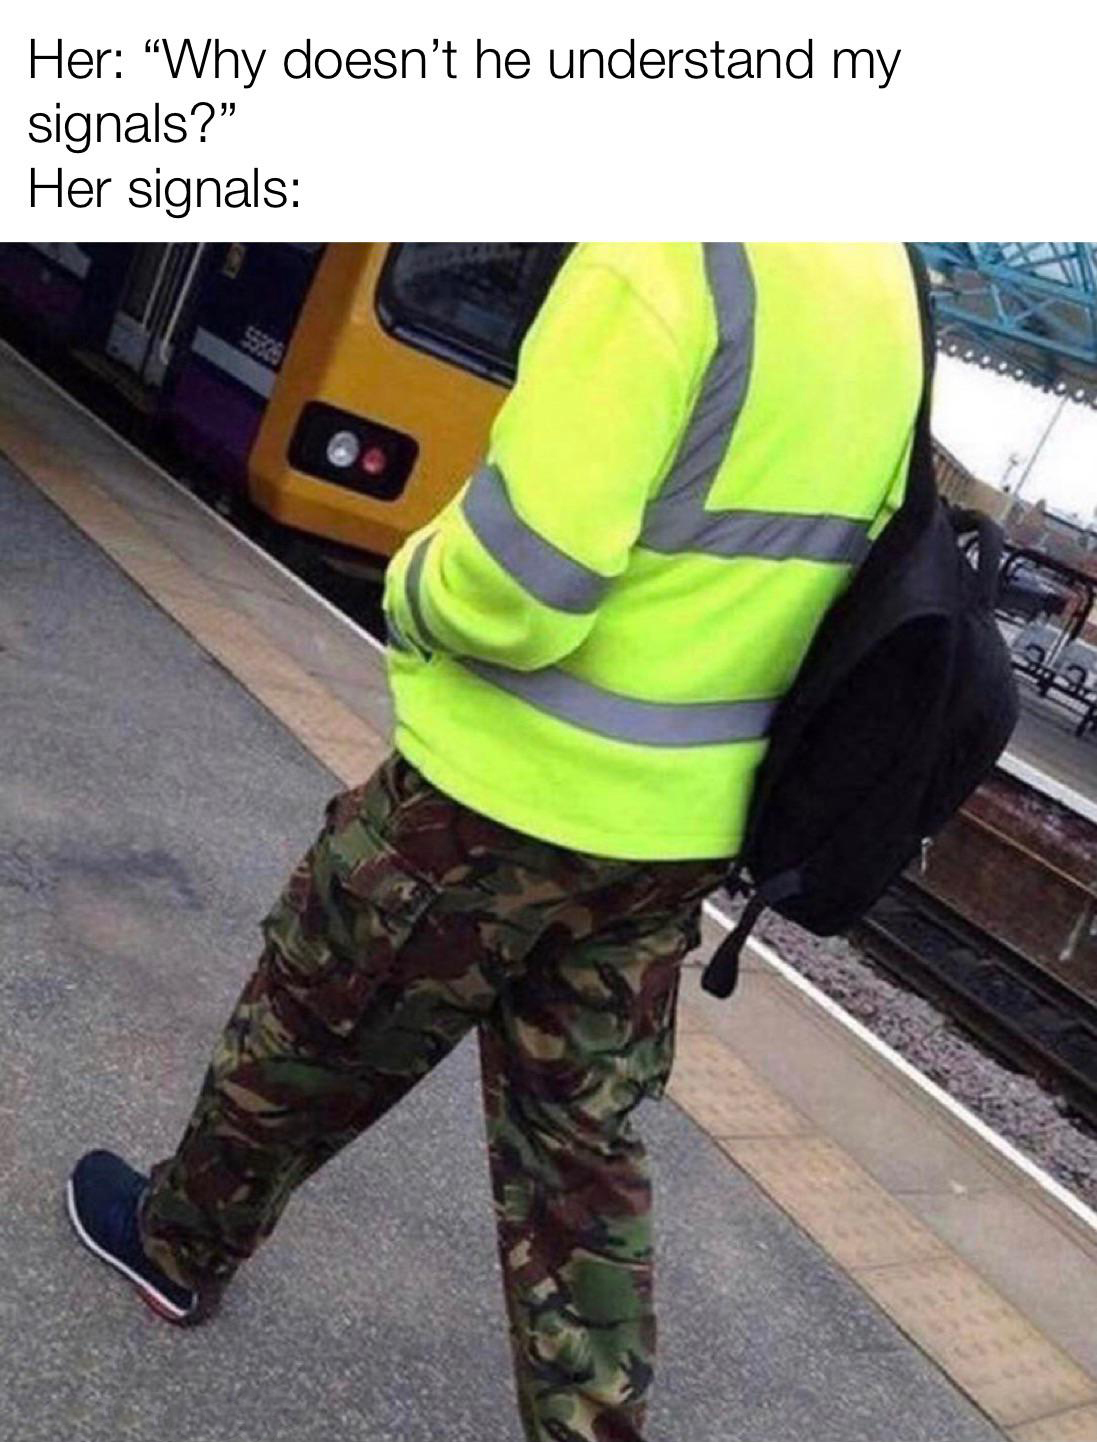 high vis and camo - Her "Why doesn't he understand my signals?" Her signals